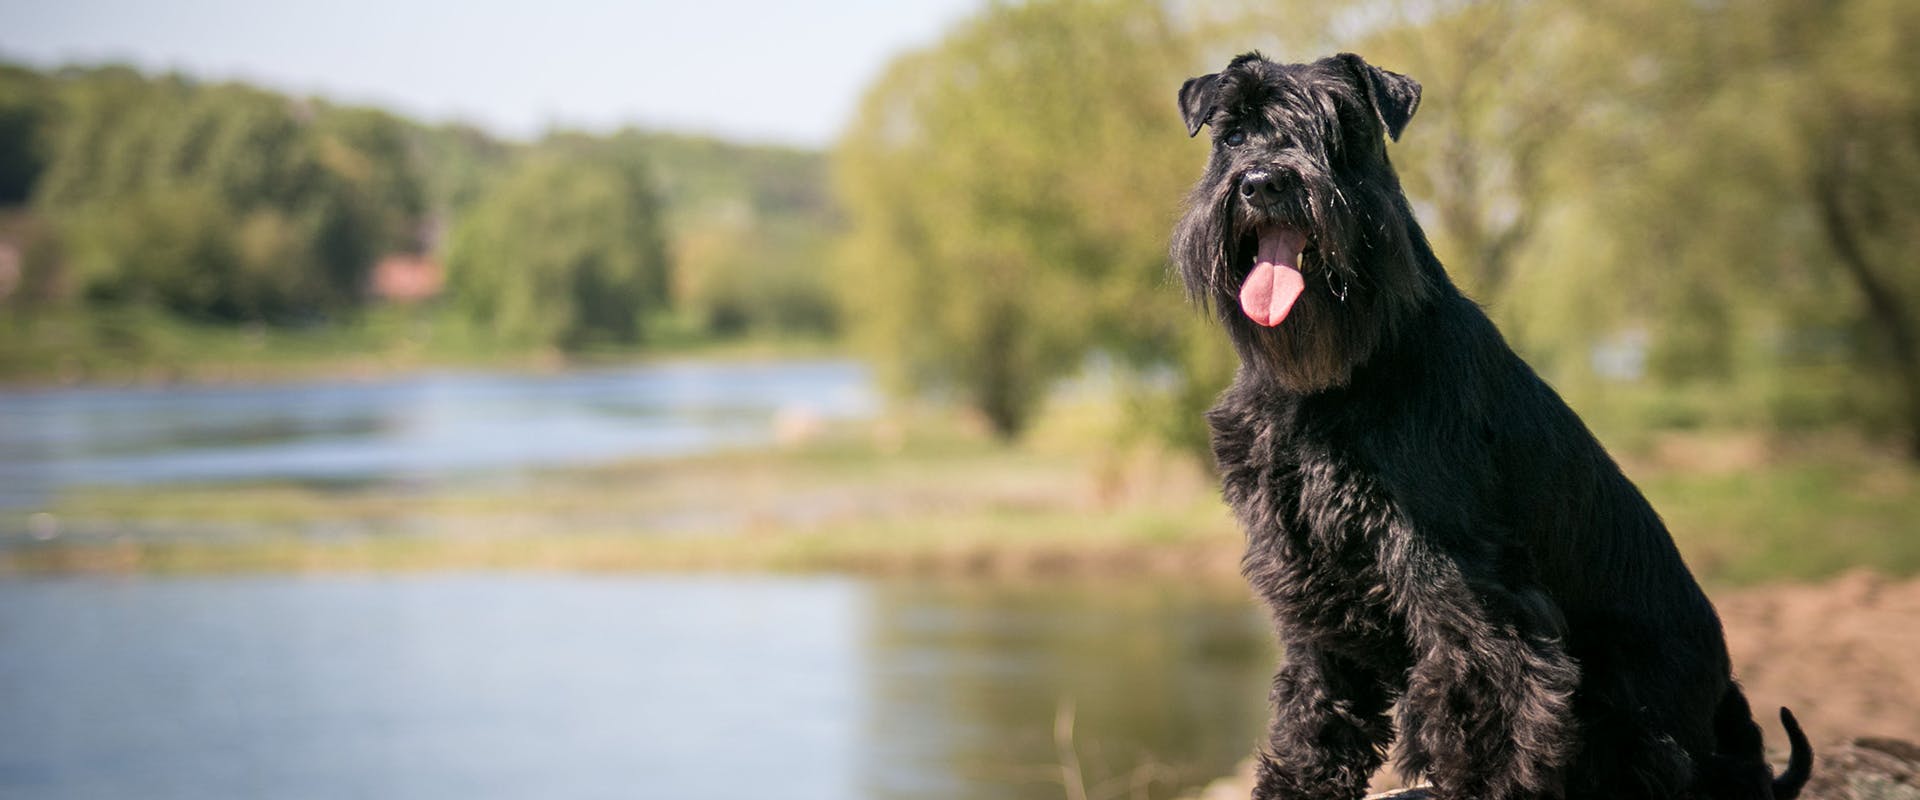 A black Giant Schnauzer dog sitting beside a lake, with some trees in the background